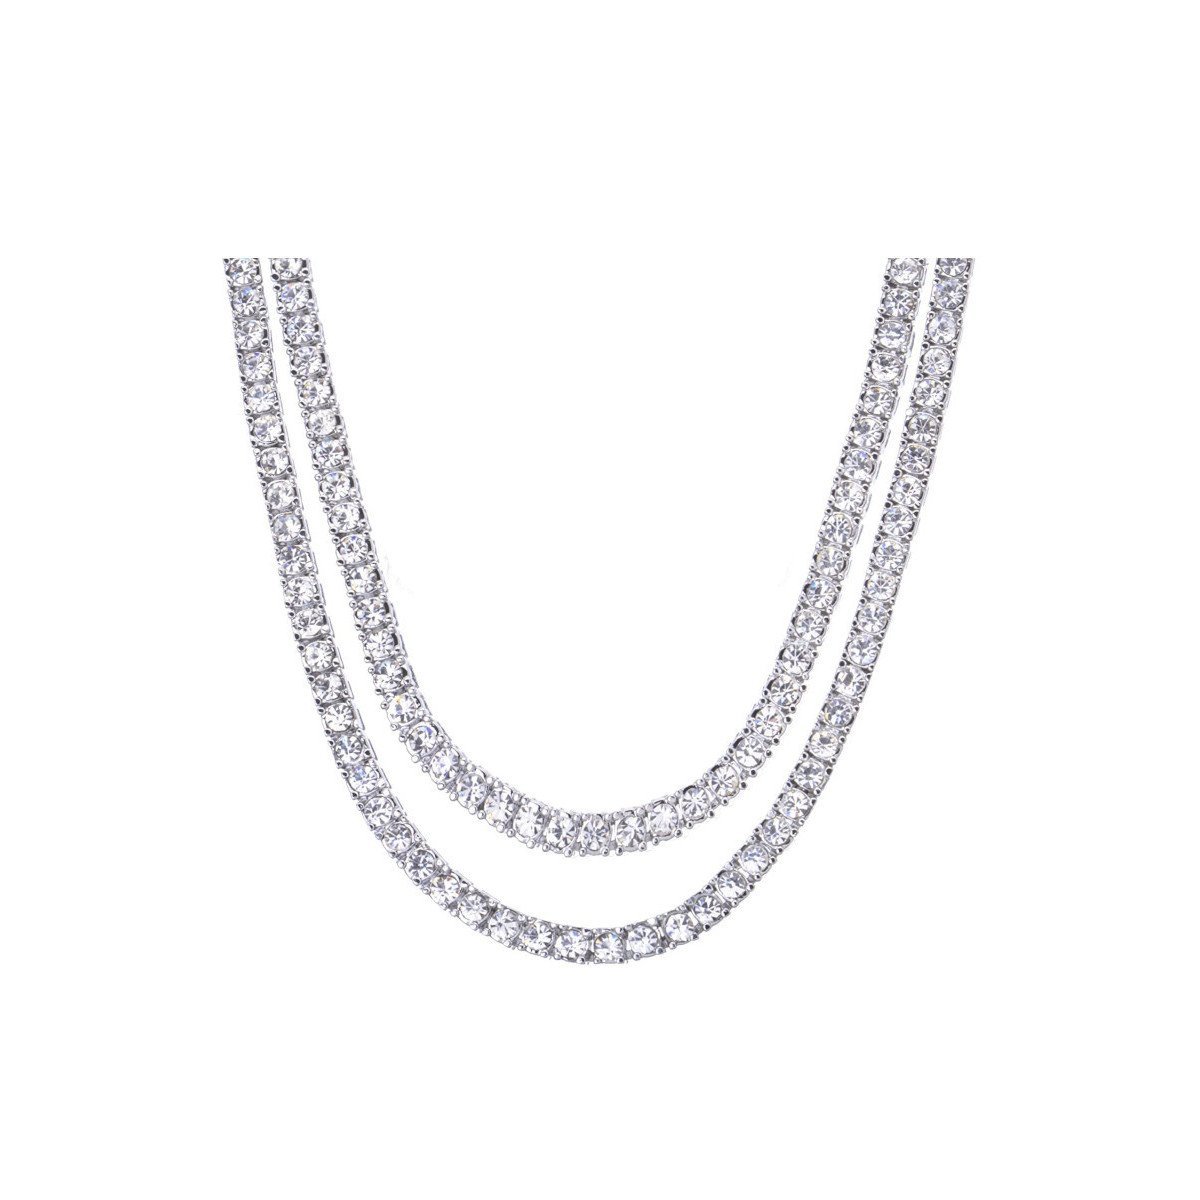 Double Tennis Chain – Silver Toned Iced-Out CZ